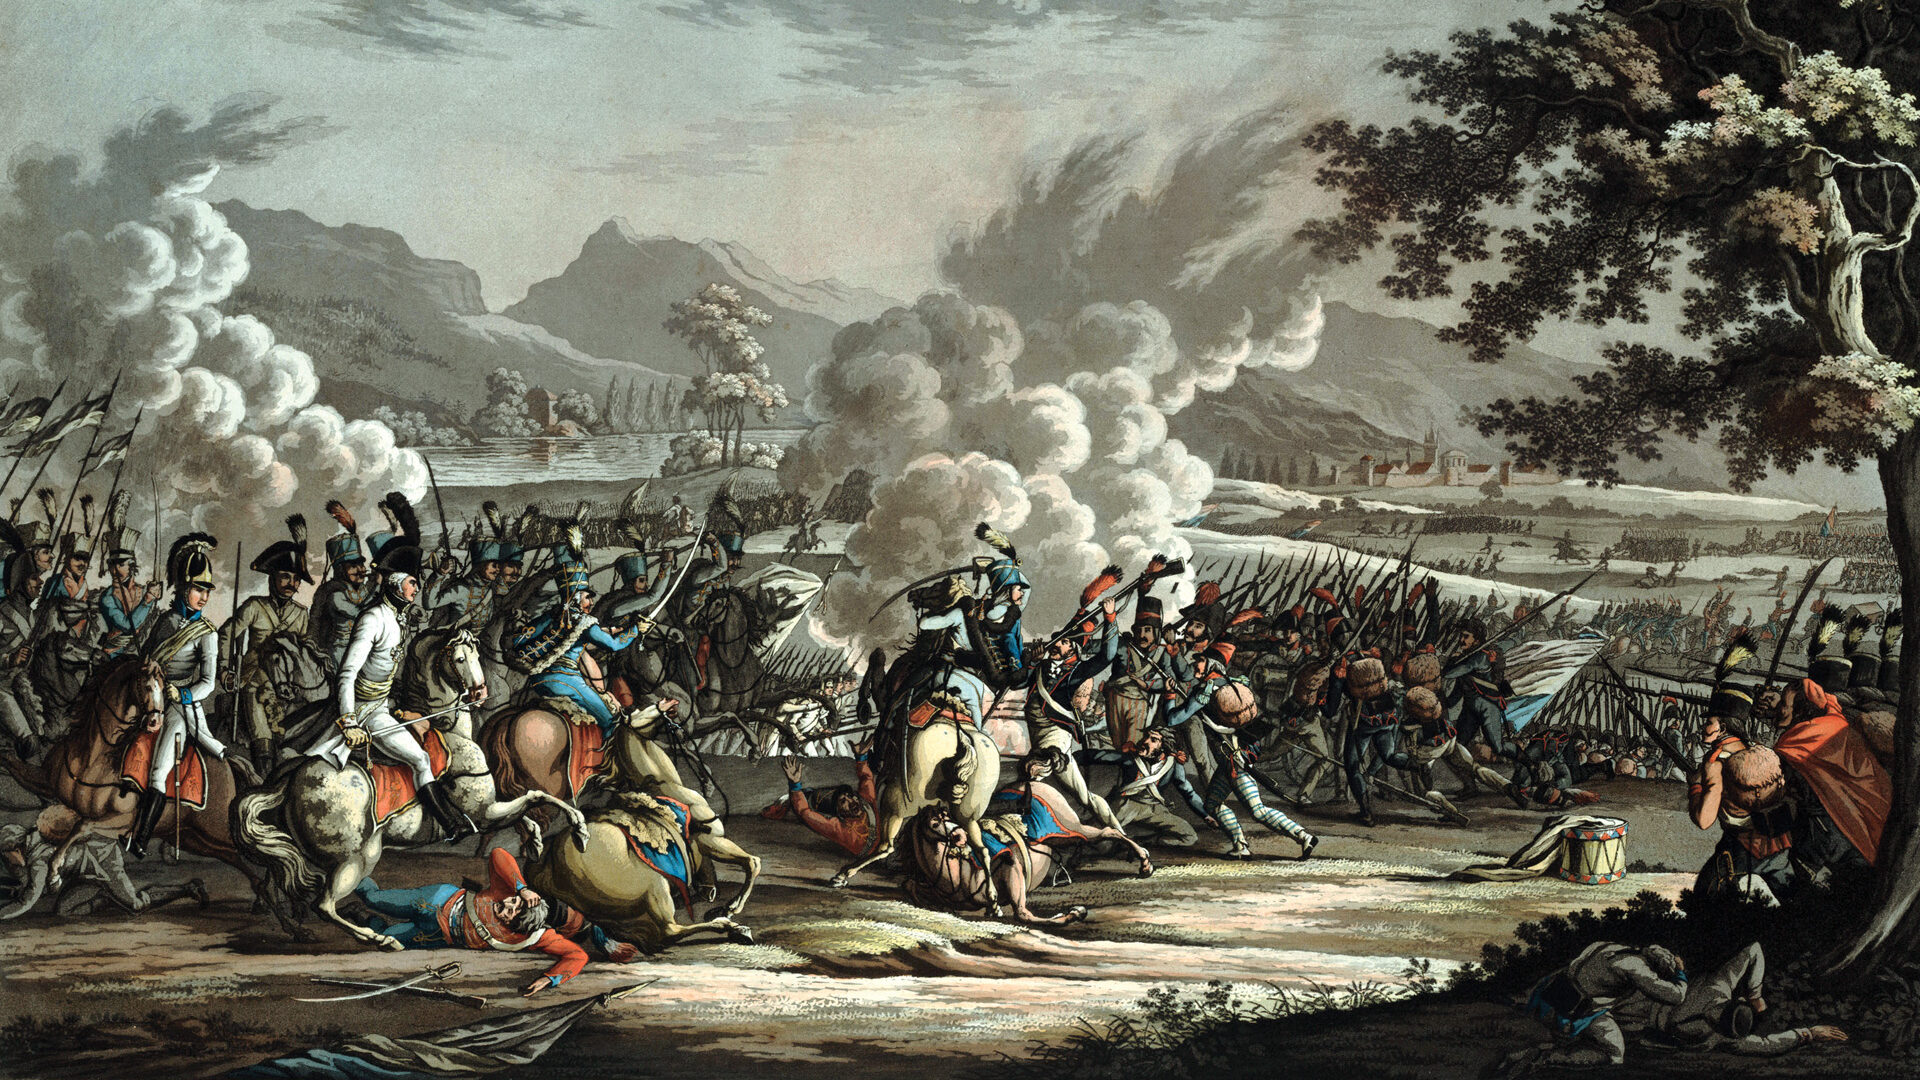 The Austrians easily defeated the French at Magnano south of  Verona because the French commander poorly handled his forces.